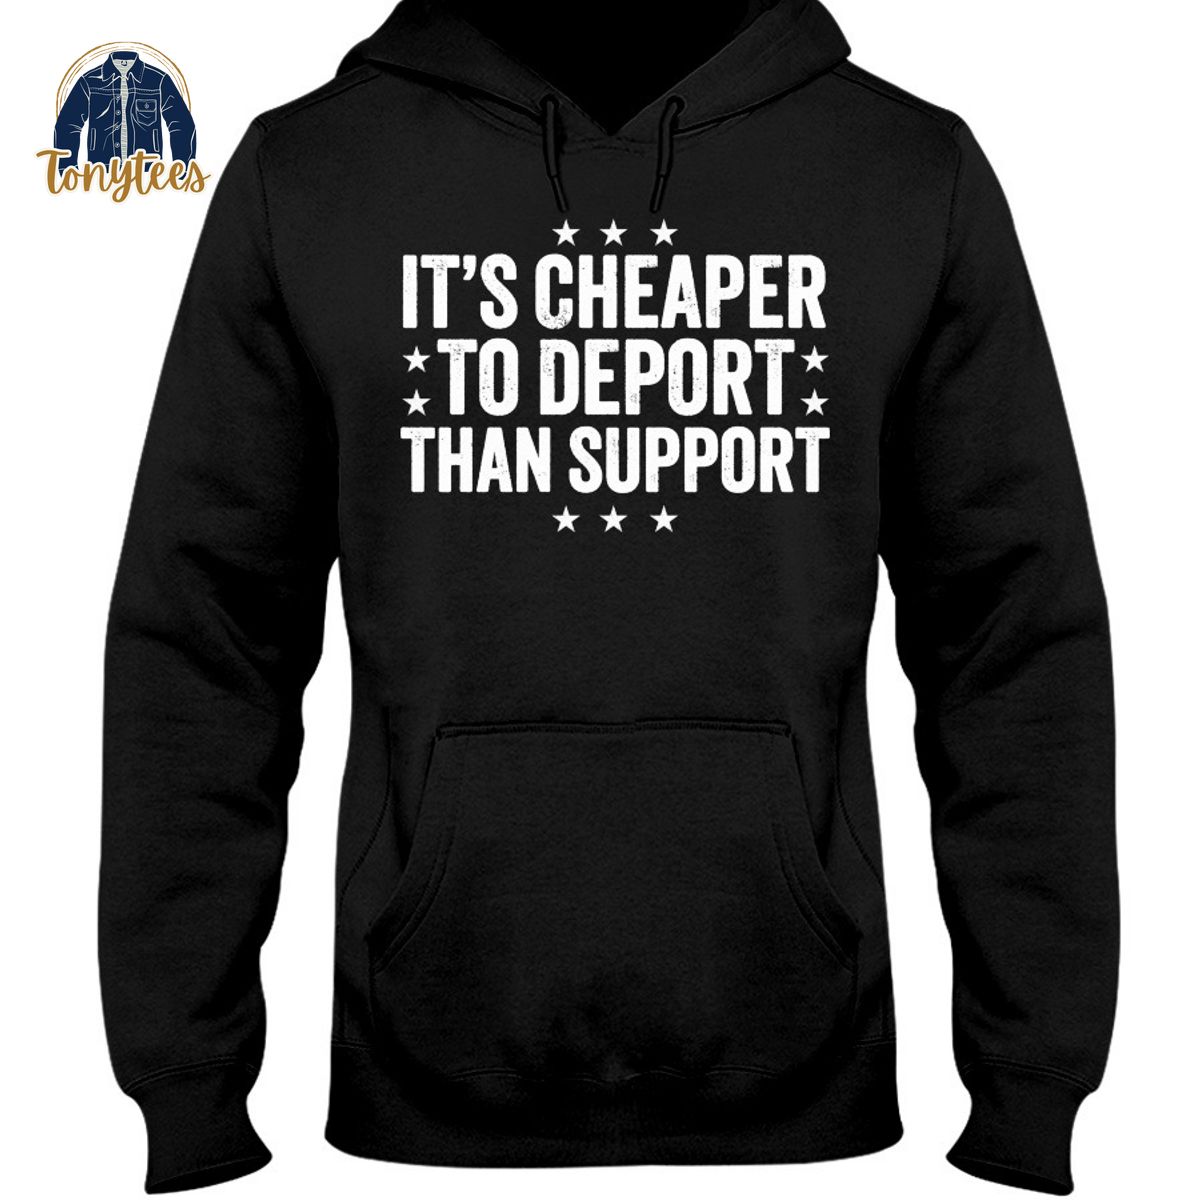 It’s cheaper tp deport than support shirt